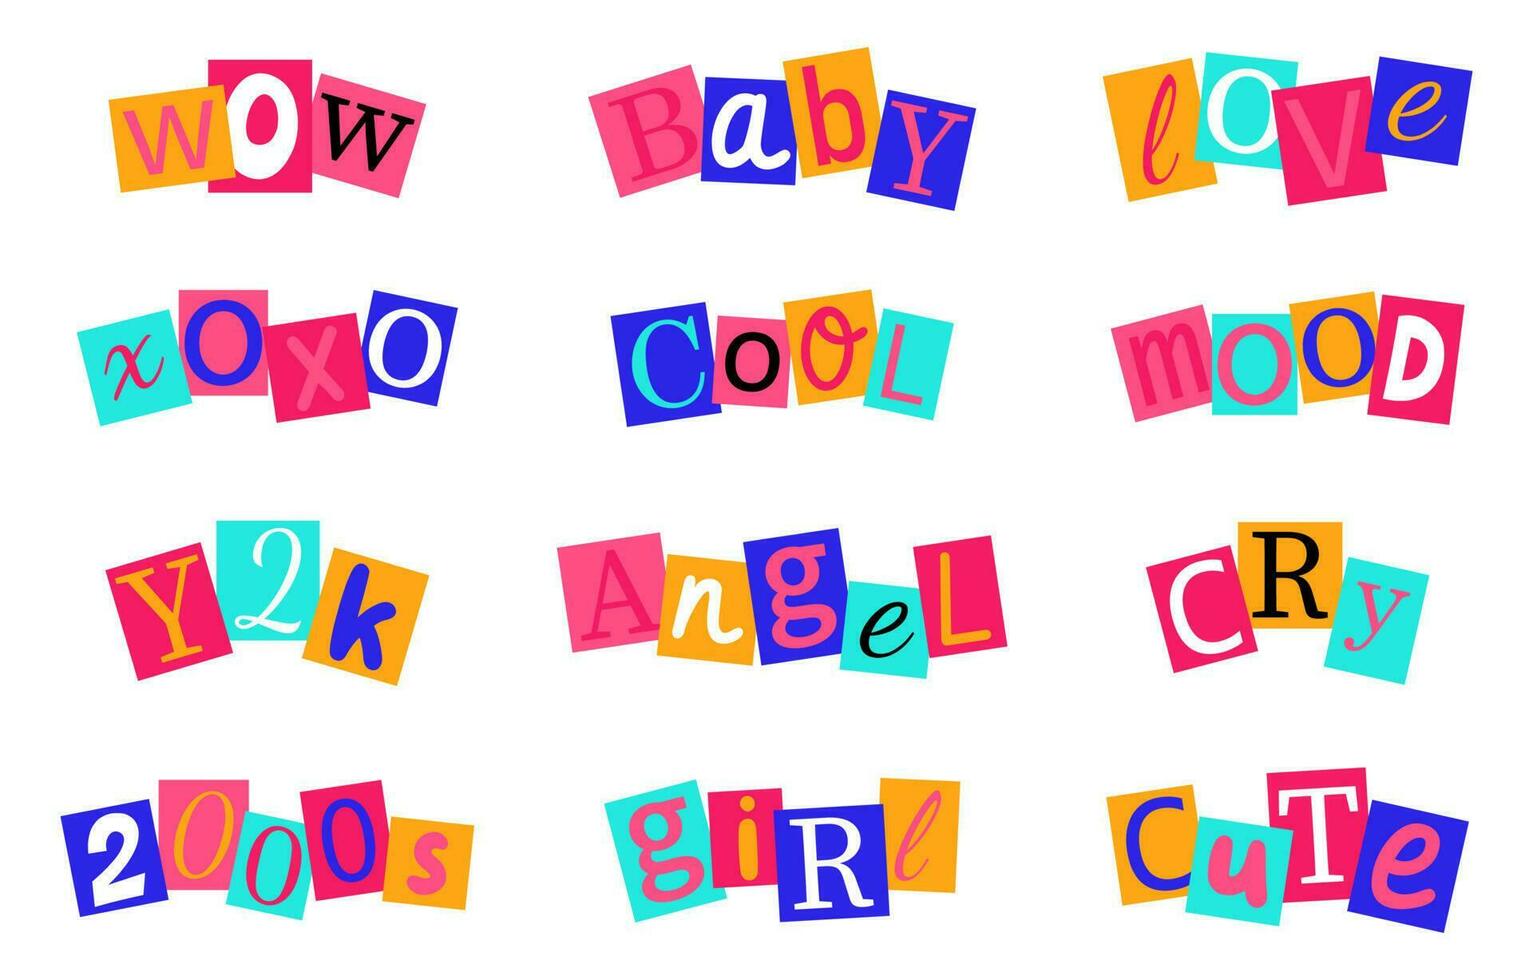 Words with letters cutting from magazines in y2k style, 90s style. Can be used for social media, web design, banner, poster or greeting card. vector